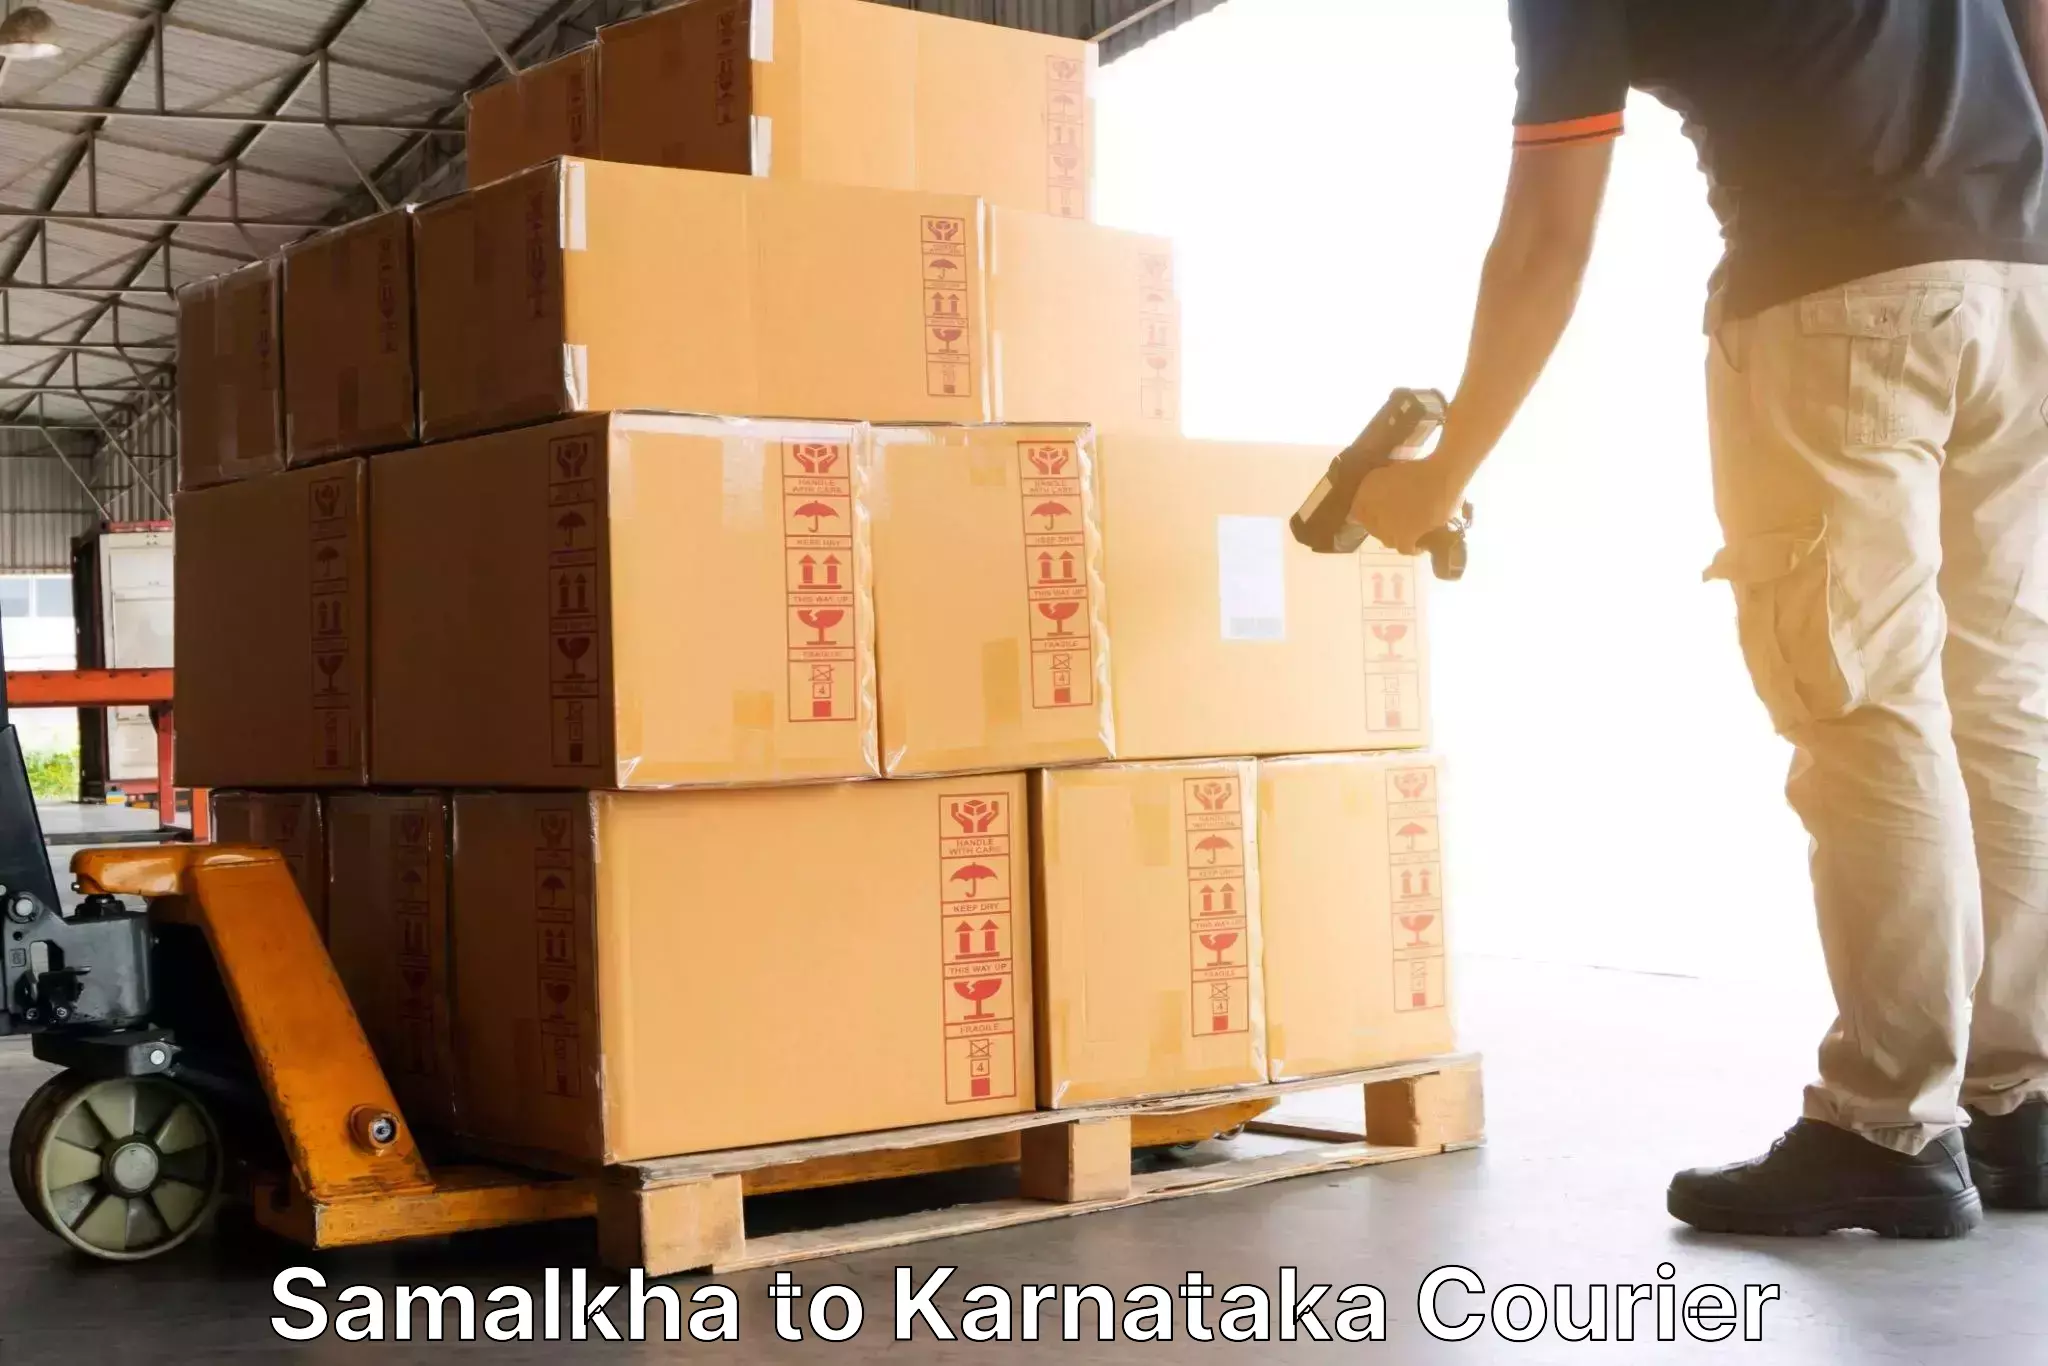 User-friendly delivery service in Samalkha to Mysore